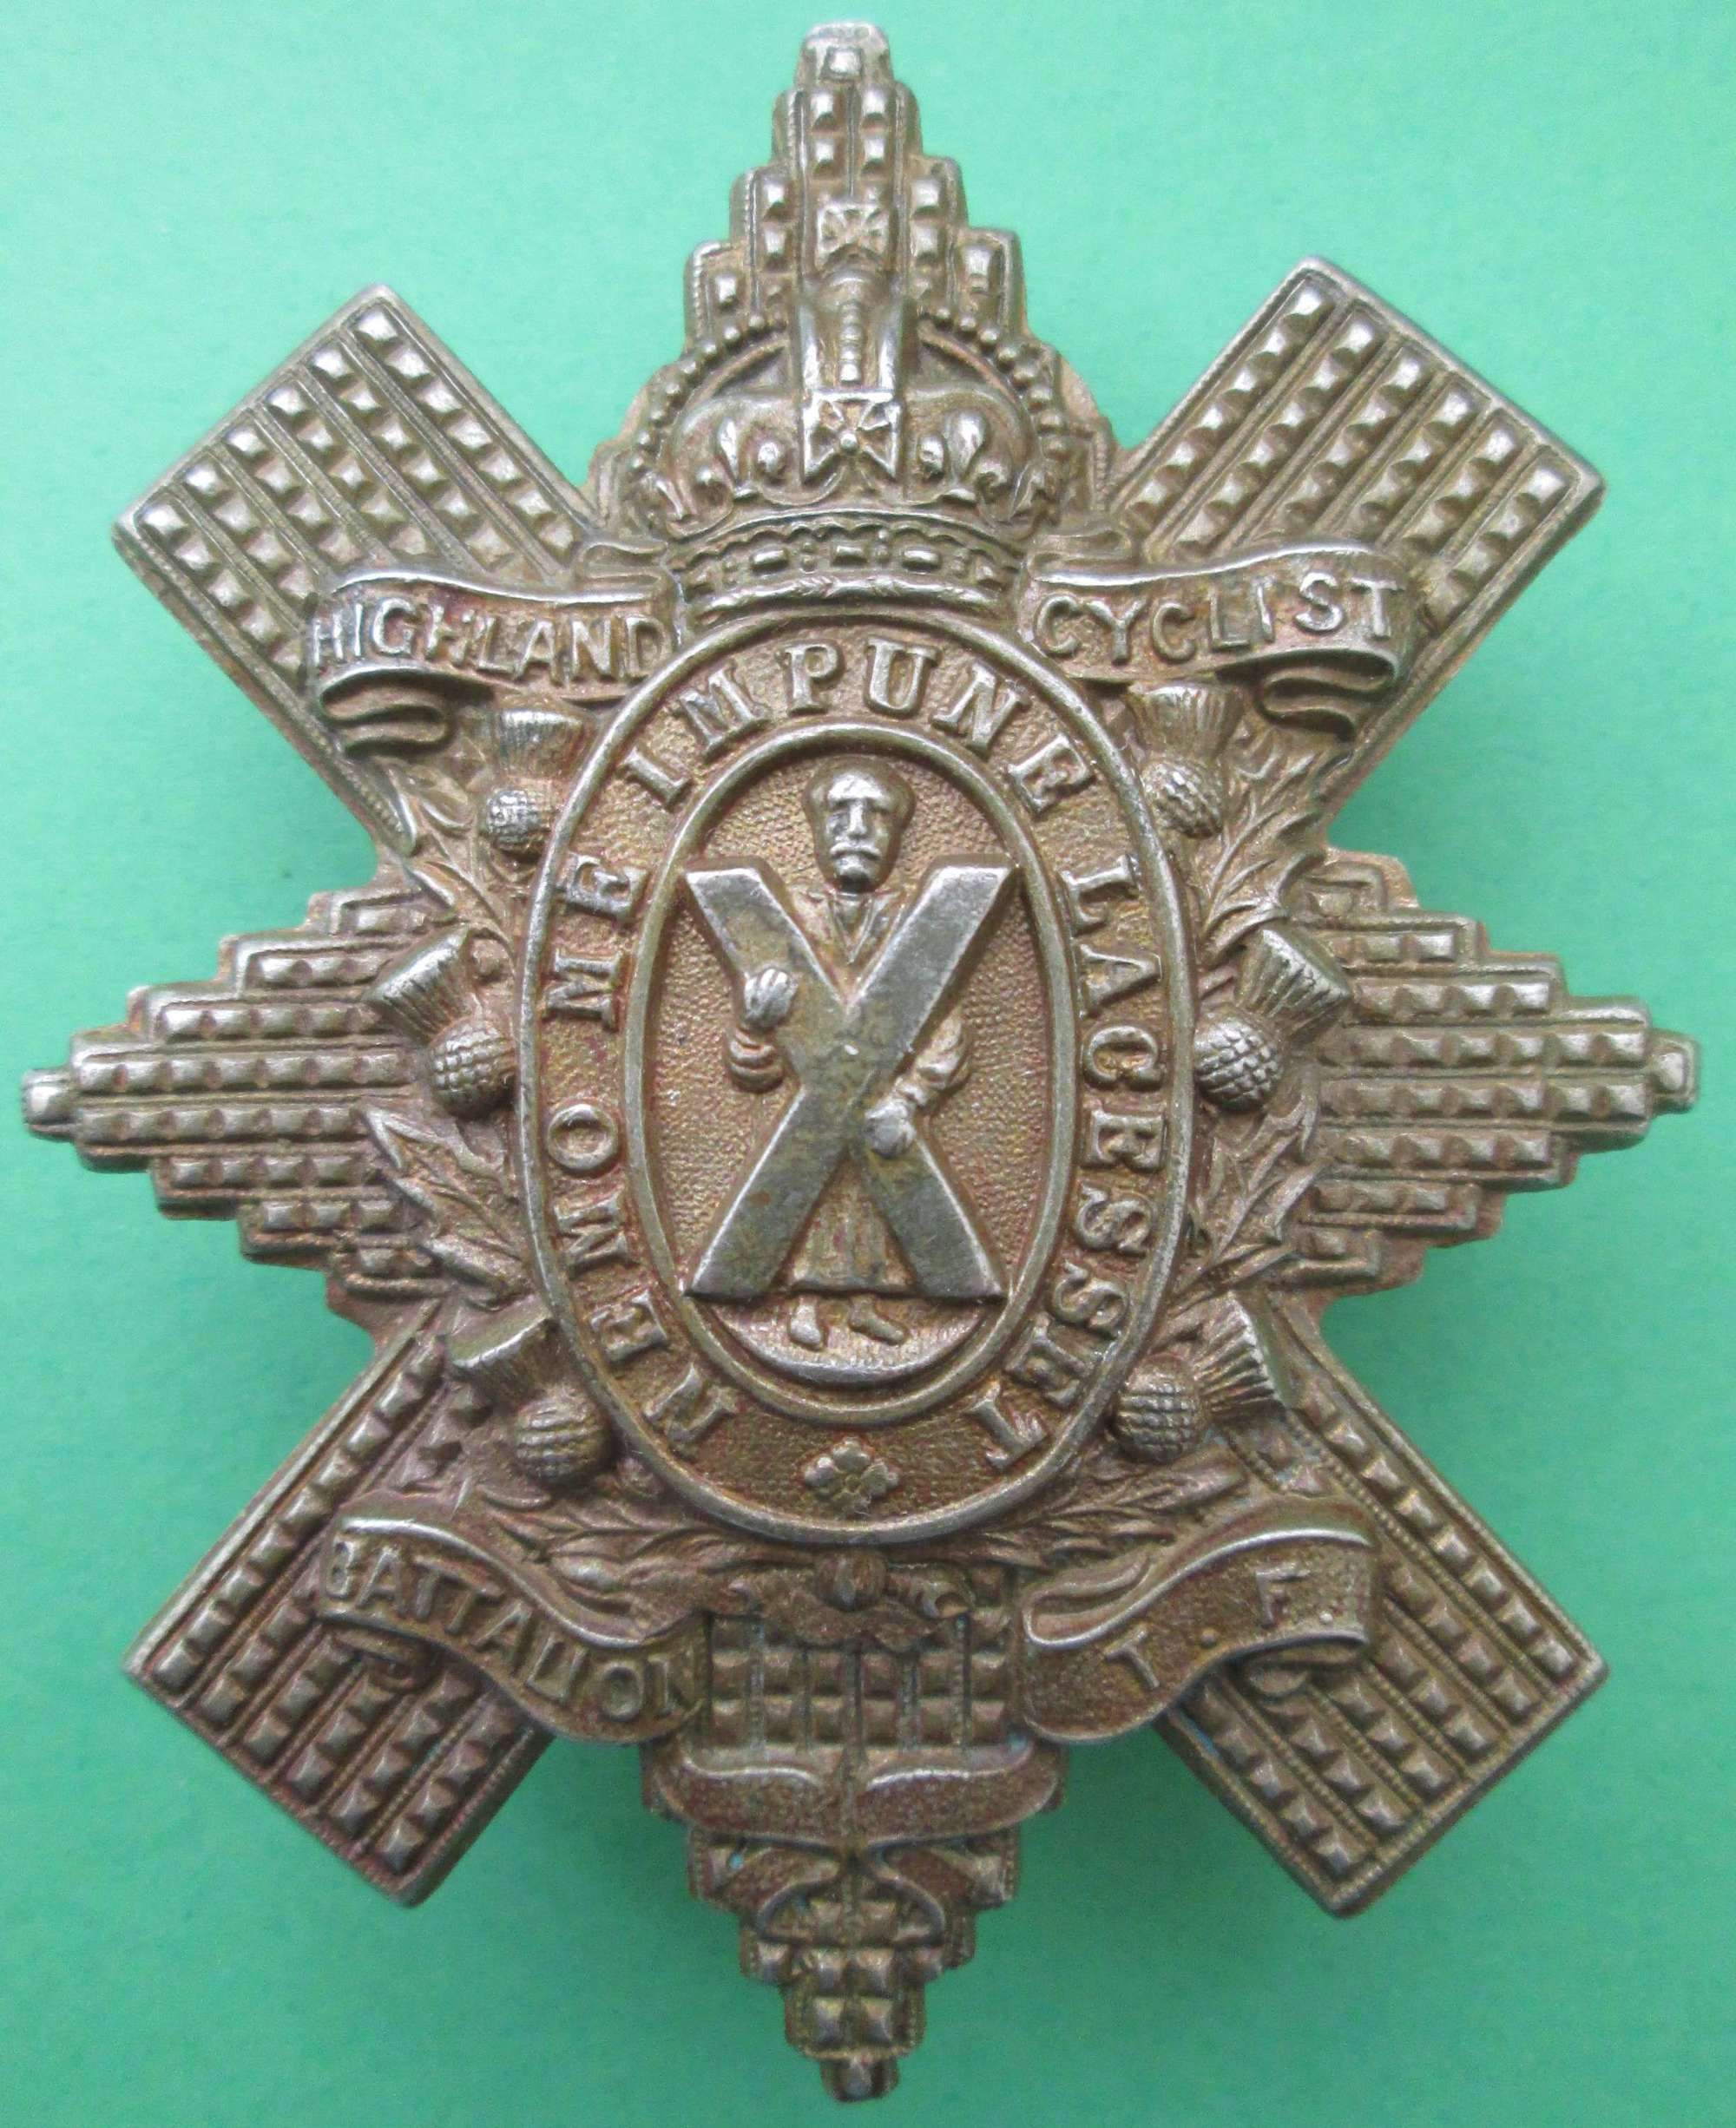 A HIGHLAND CYCLIST BATTALION TERRITORIAL FORCE GLENGARRY BADGE